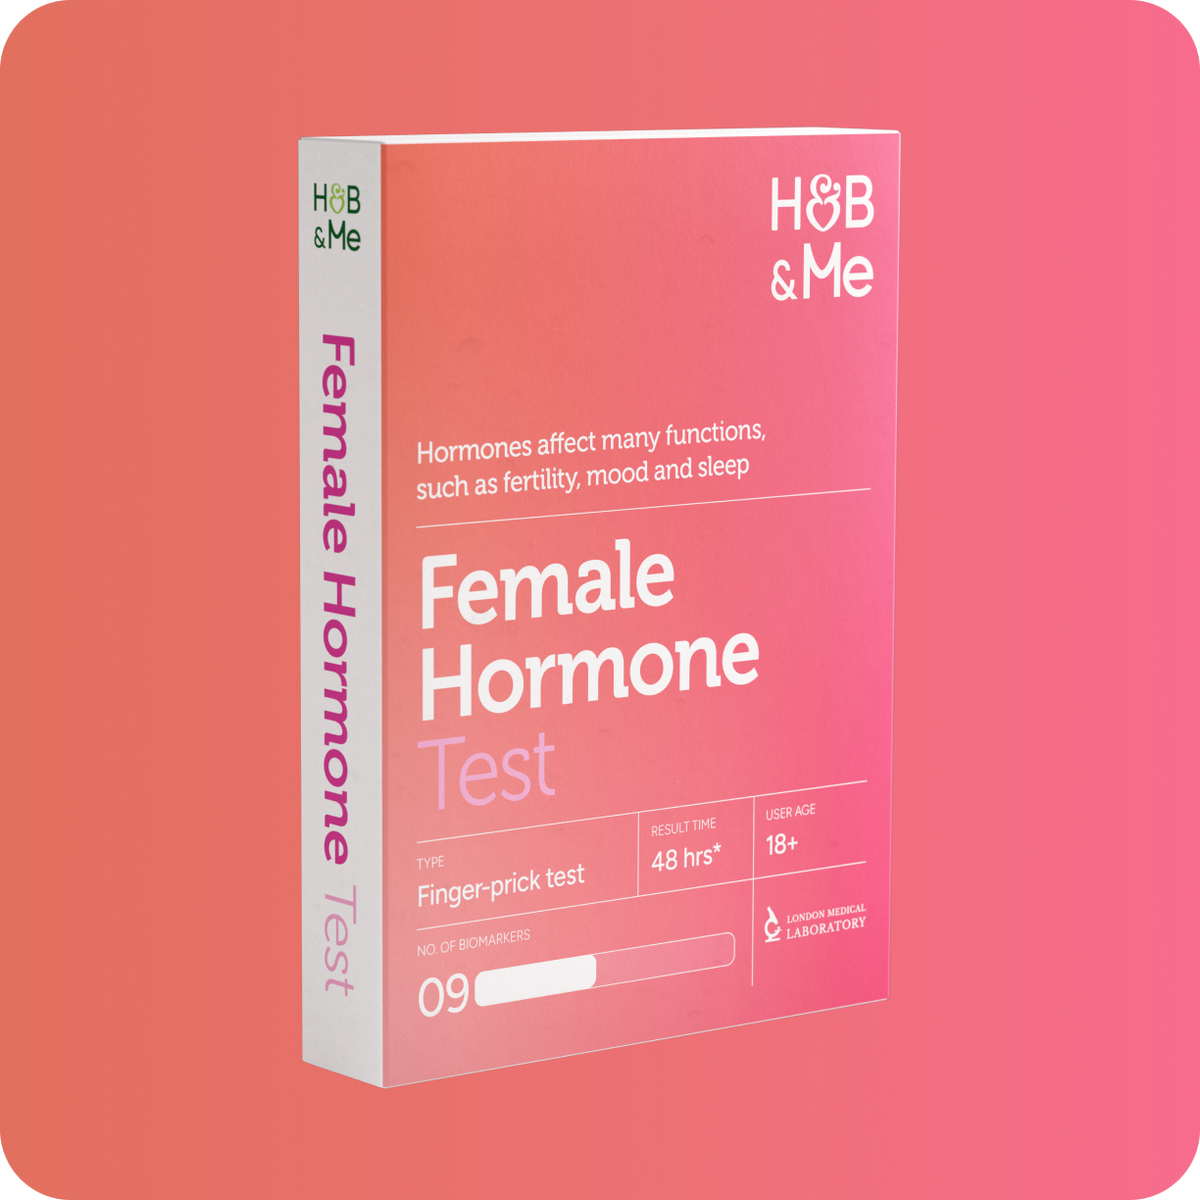 Female Hormone blood test kit on pink/red background.